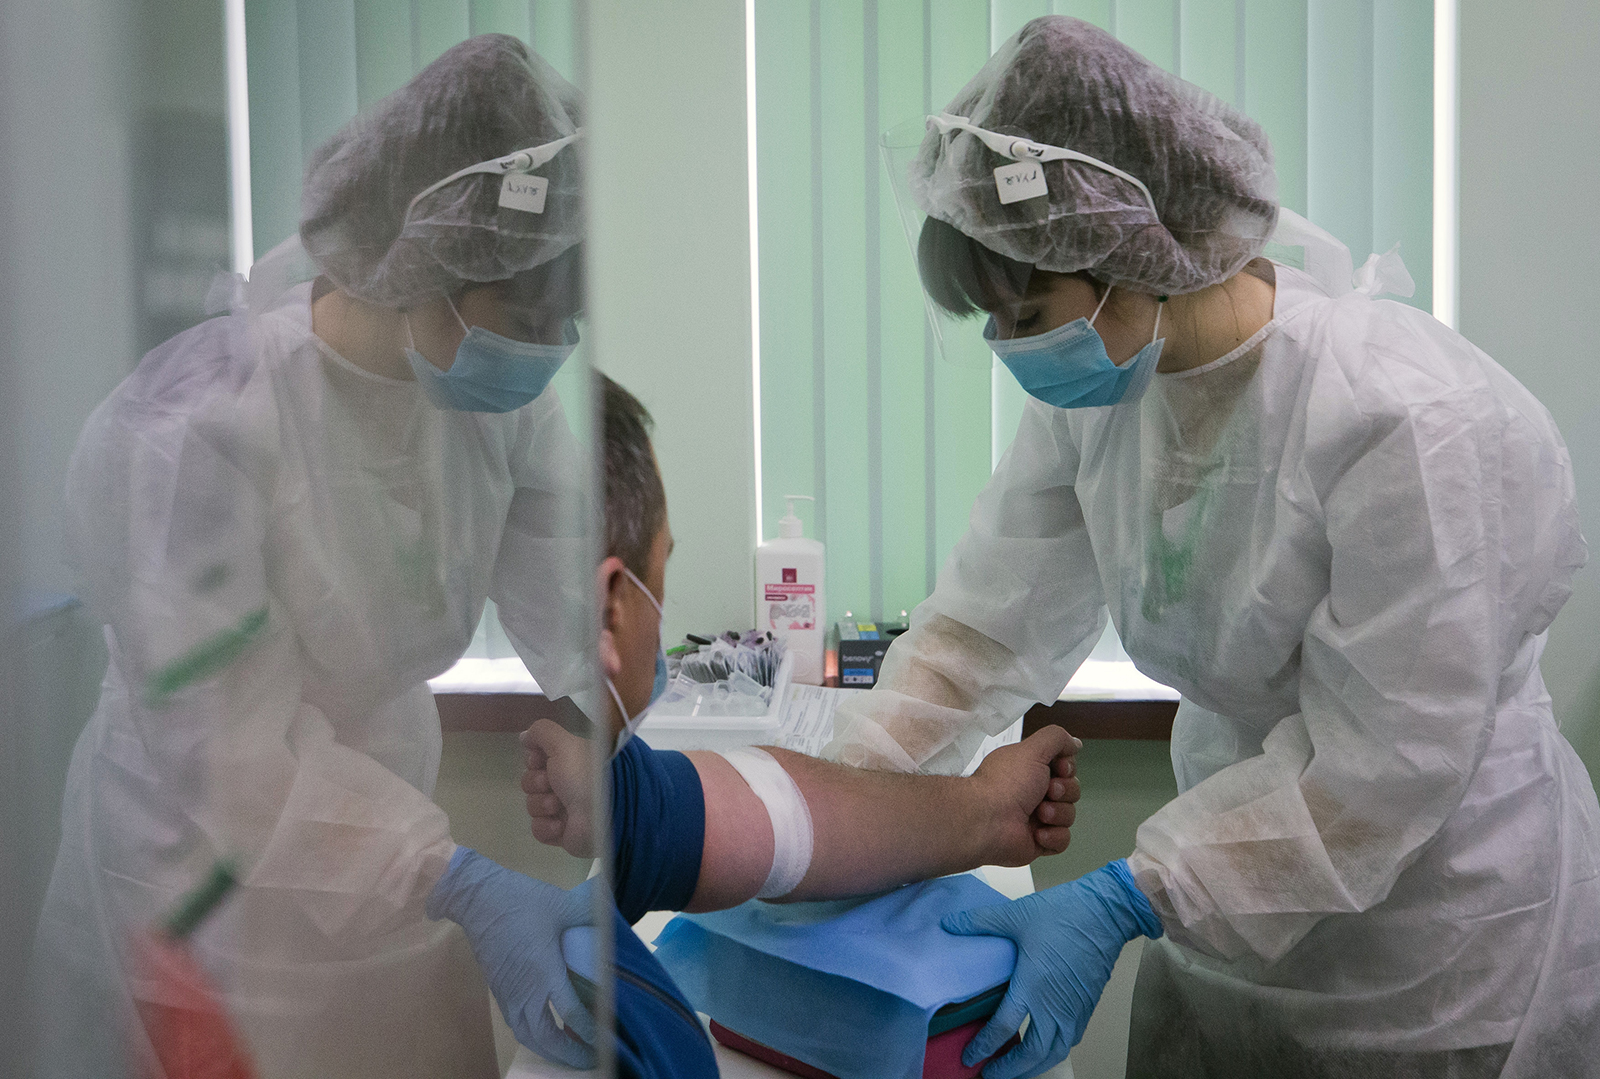 A medical worker takes a venous blood sample from a patient for Covid-19 antibody testing at a Gemotest lab in Simferopol, Crimea, Russia, on November 20.